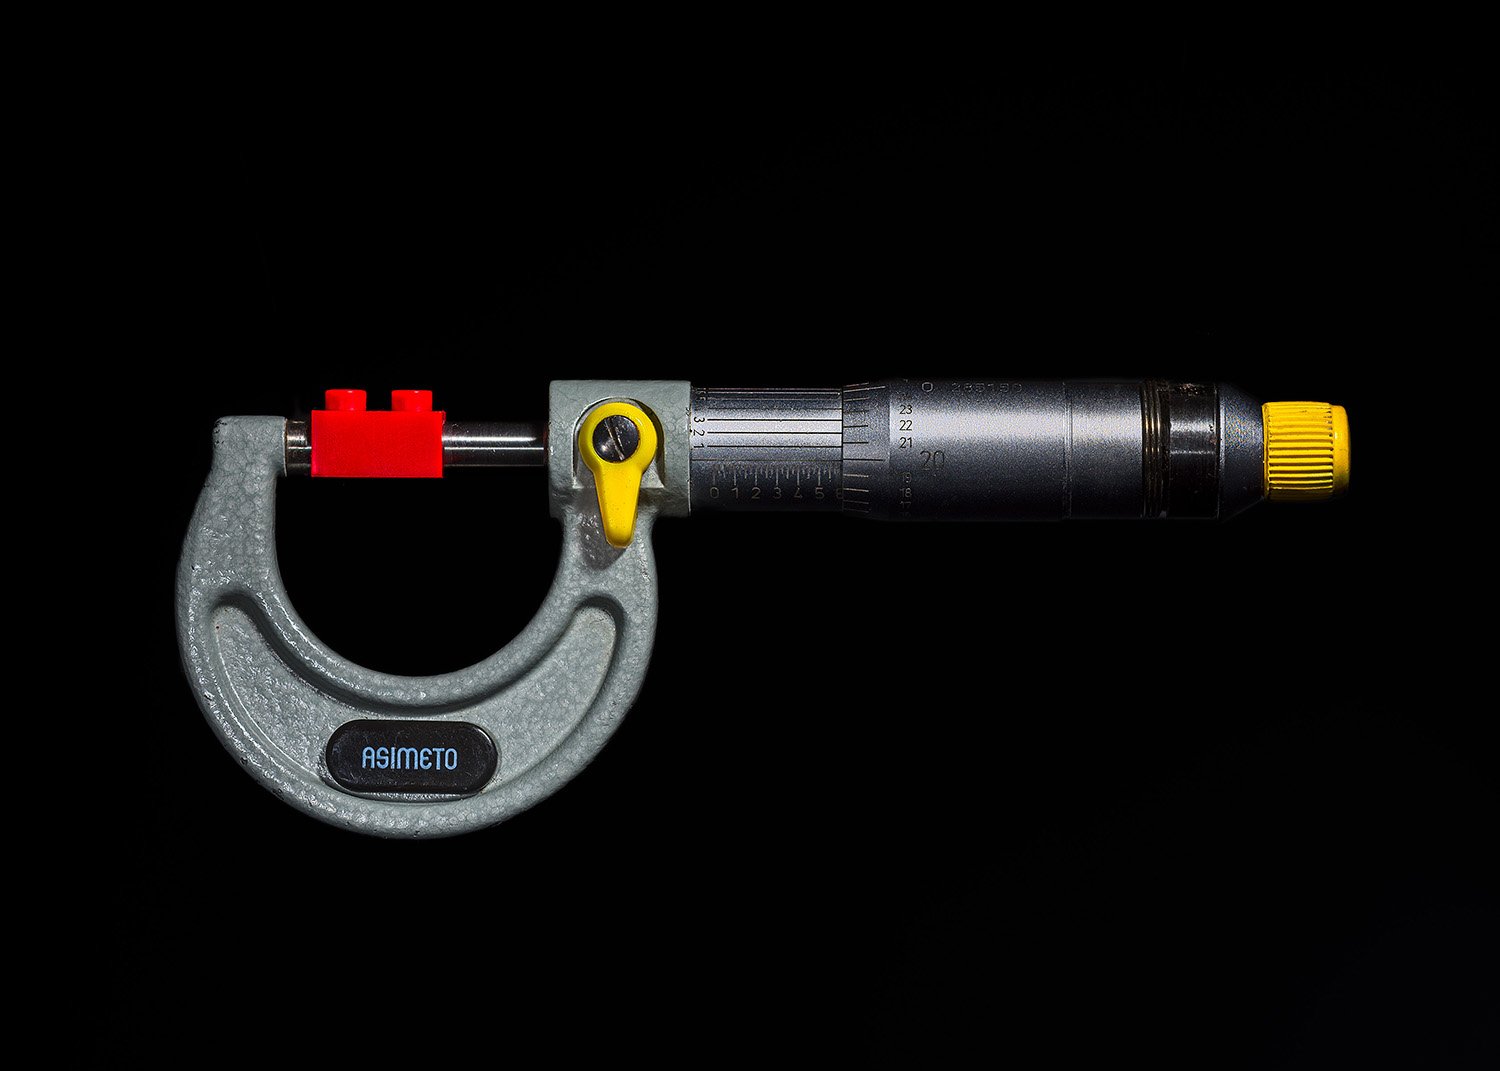 Micrometer with Lego